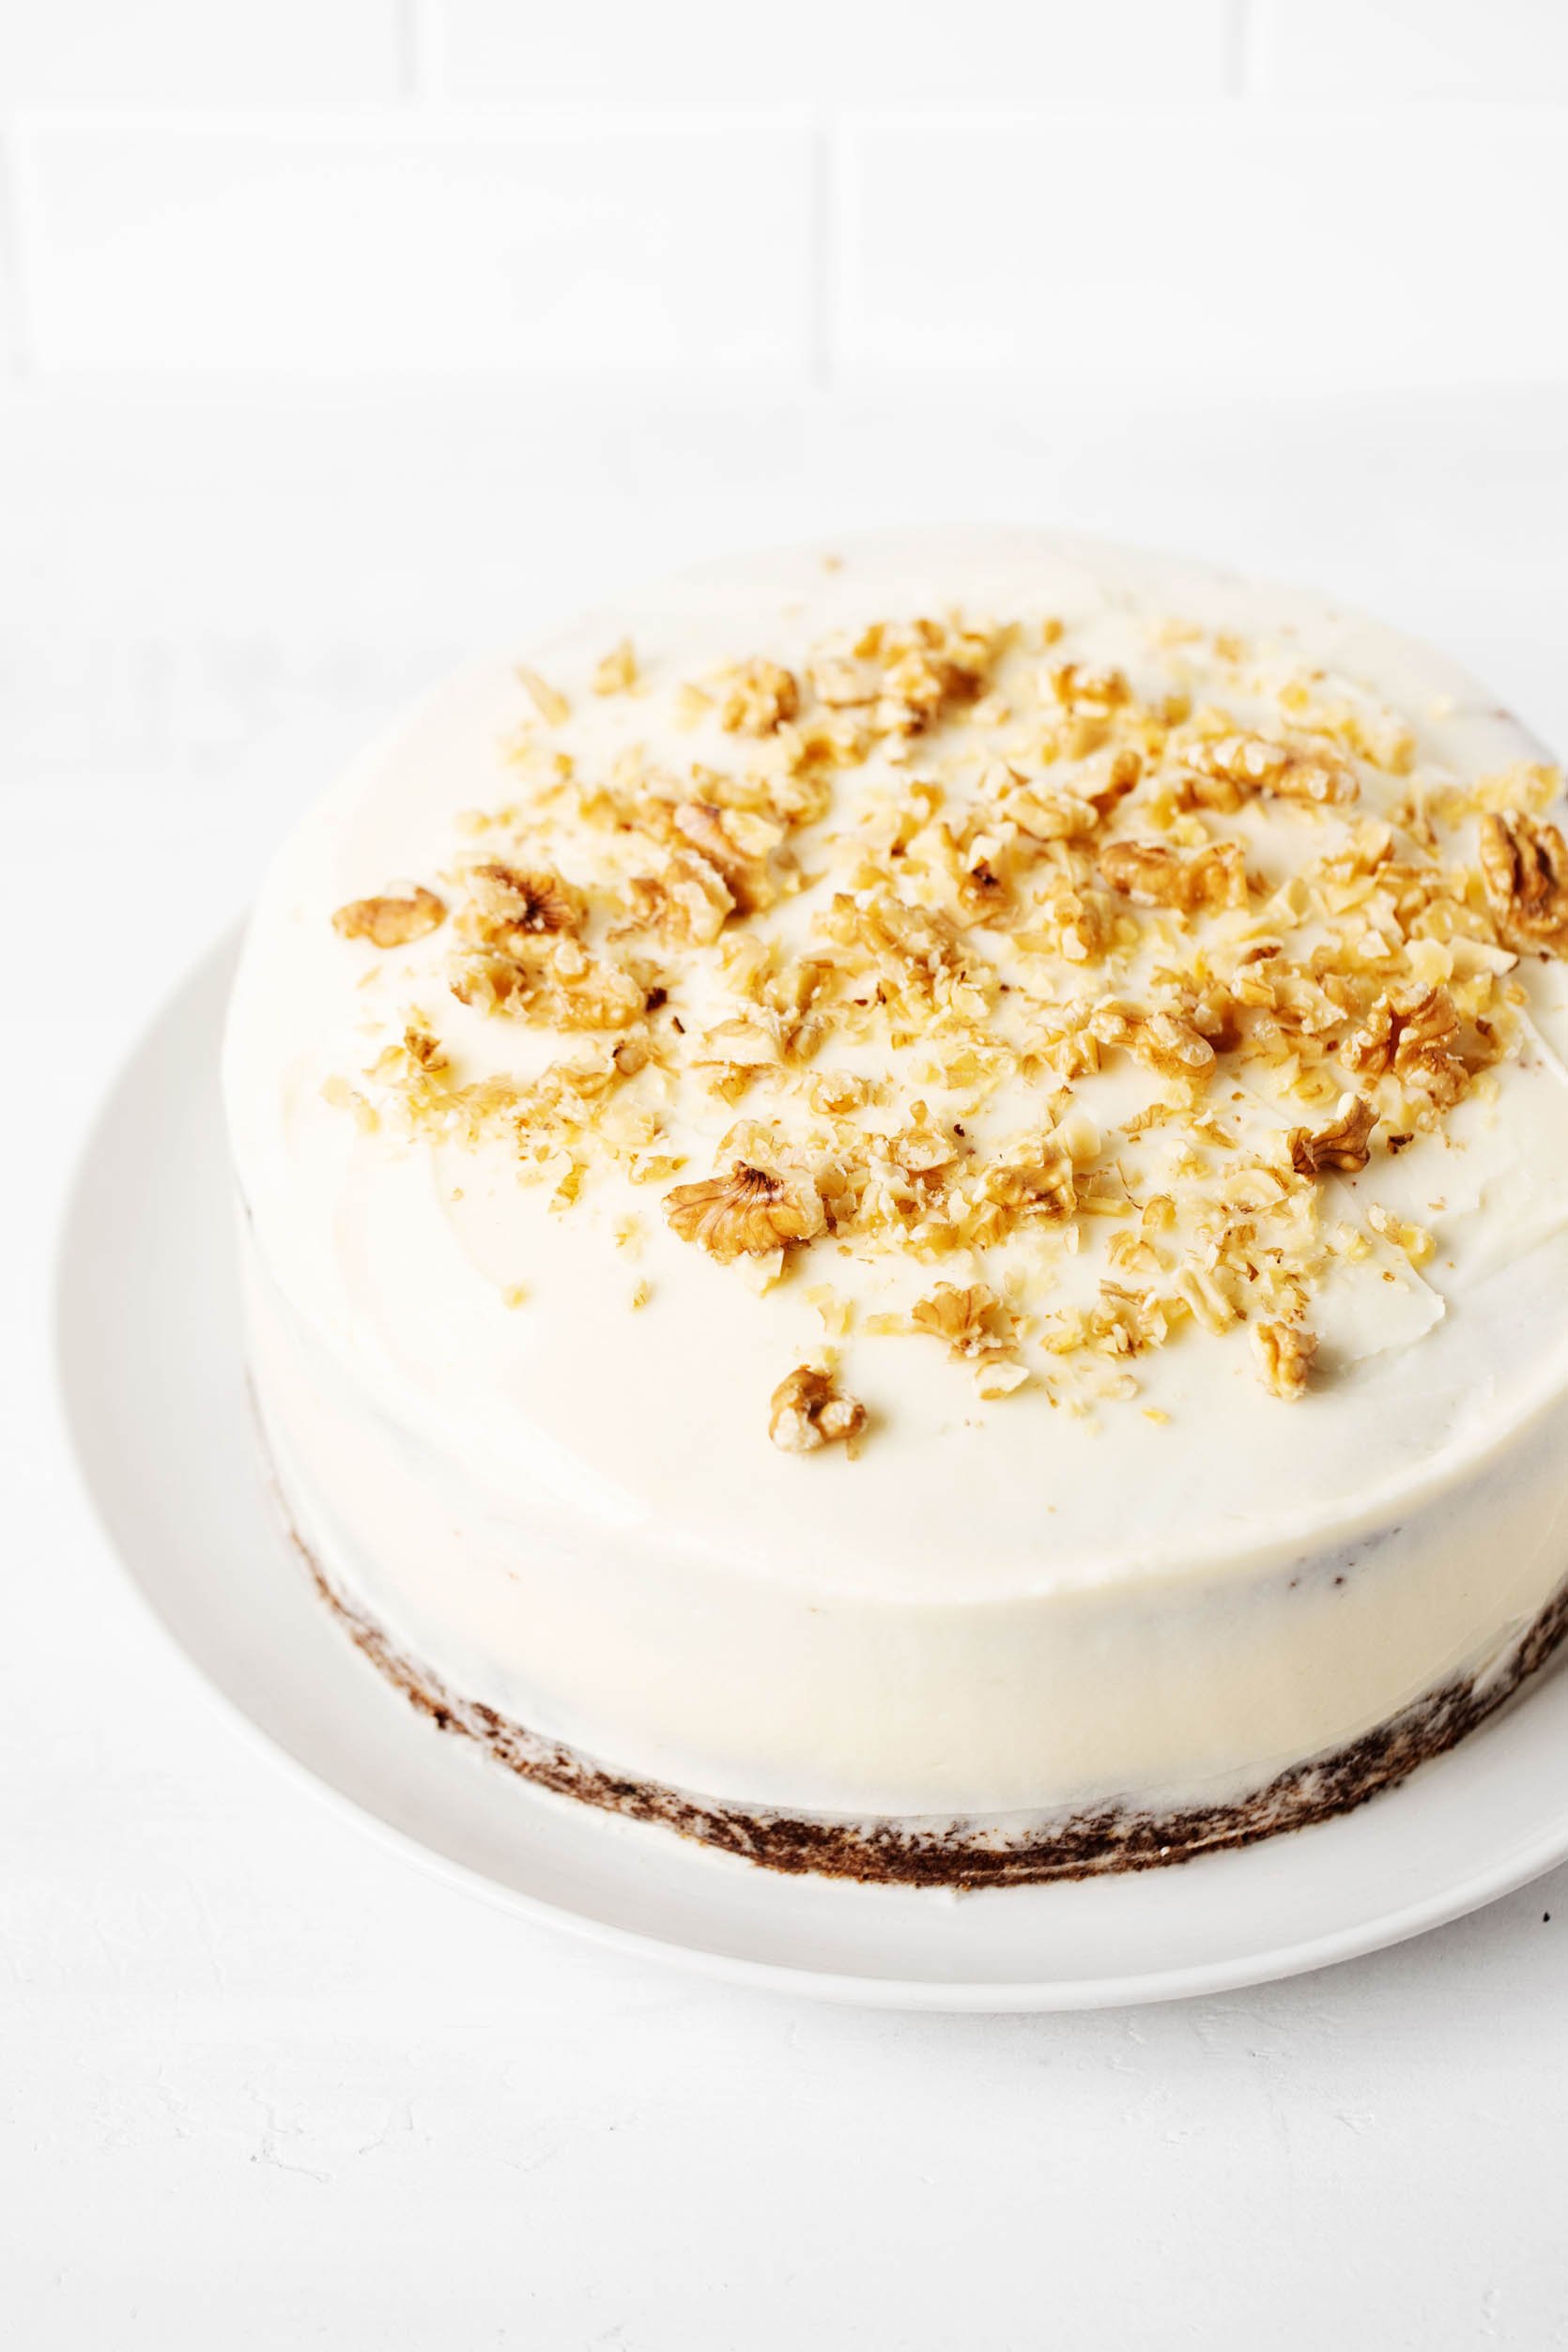 A frosted vegan carrot cake with chopped walnuts on top.